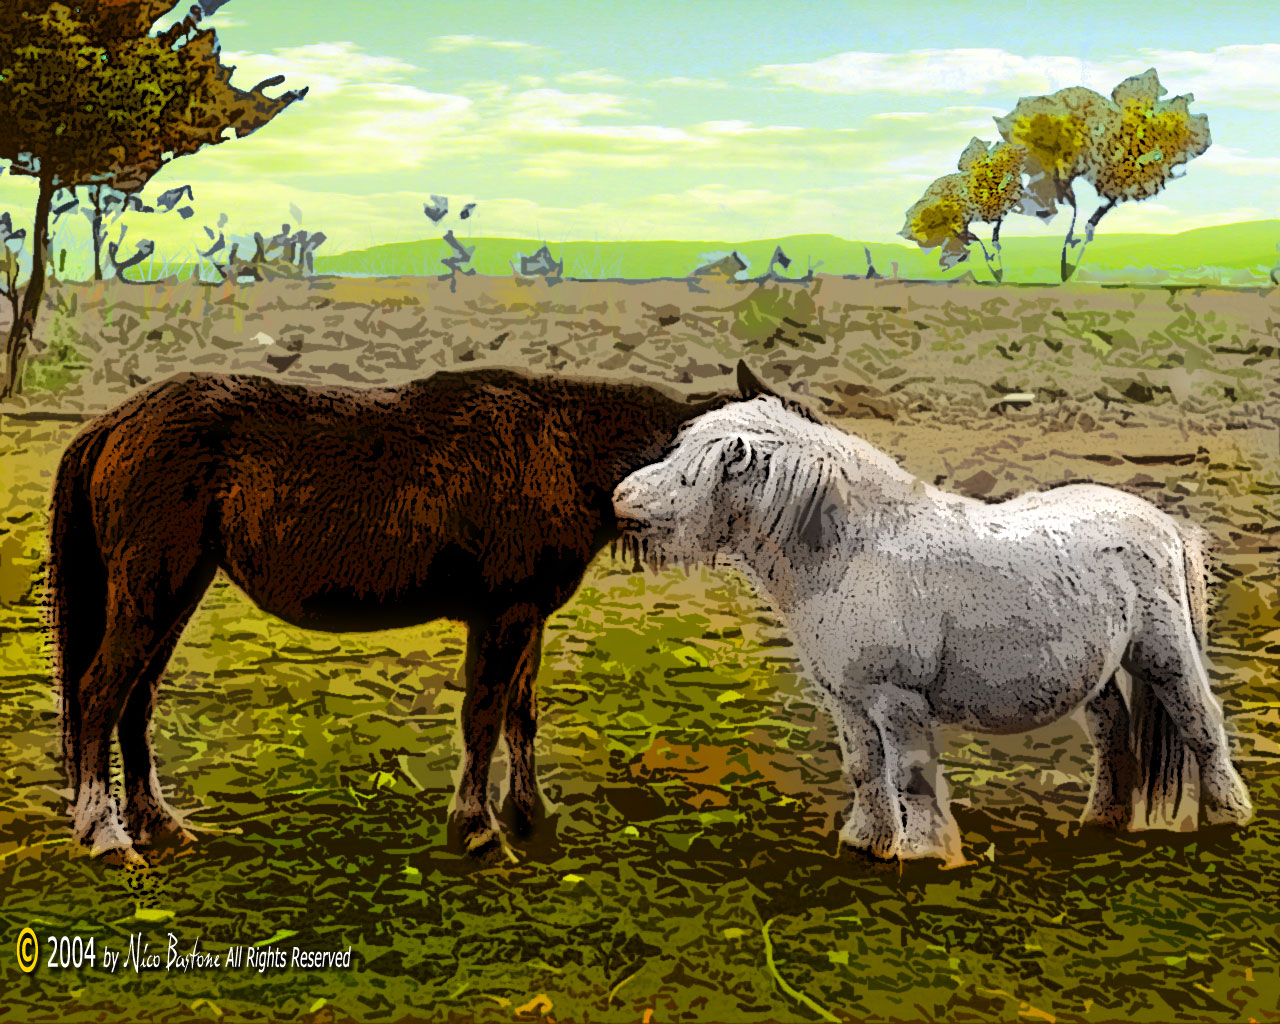 Friends - Wallpapers Sfondi per Desktop - Copyright by Nico Bastone - All Rights Reserved